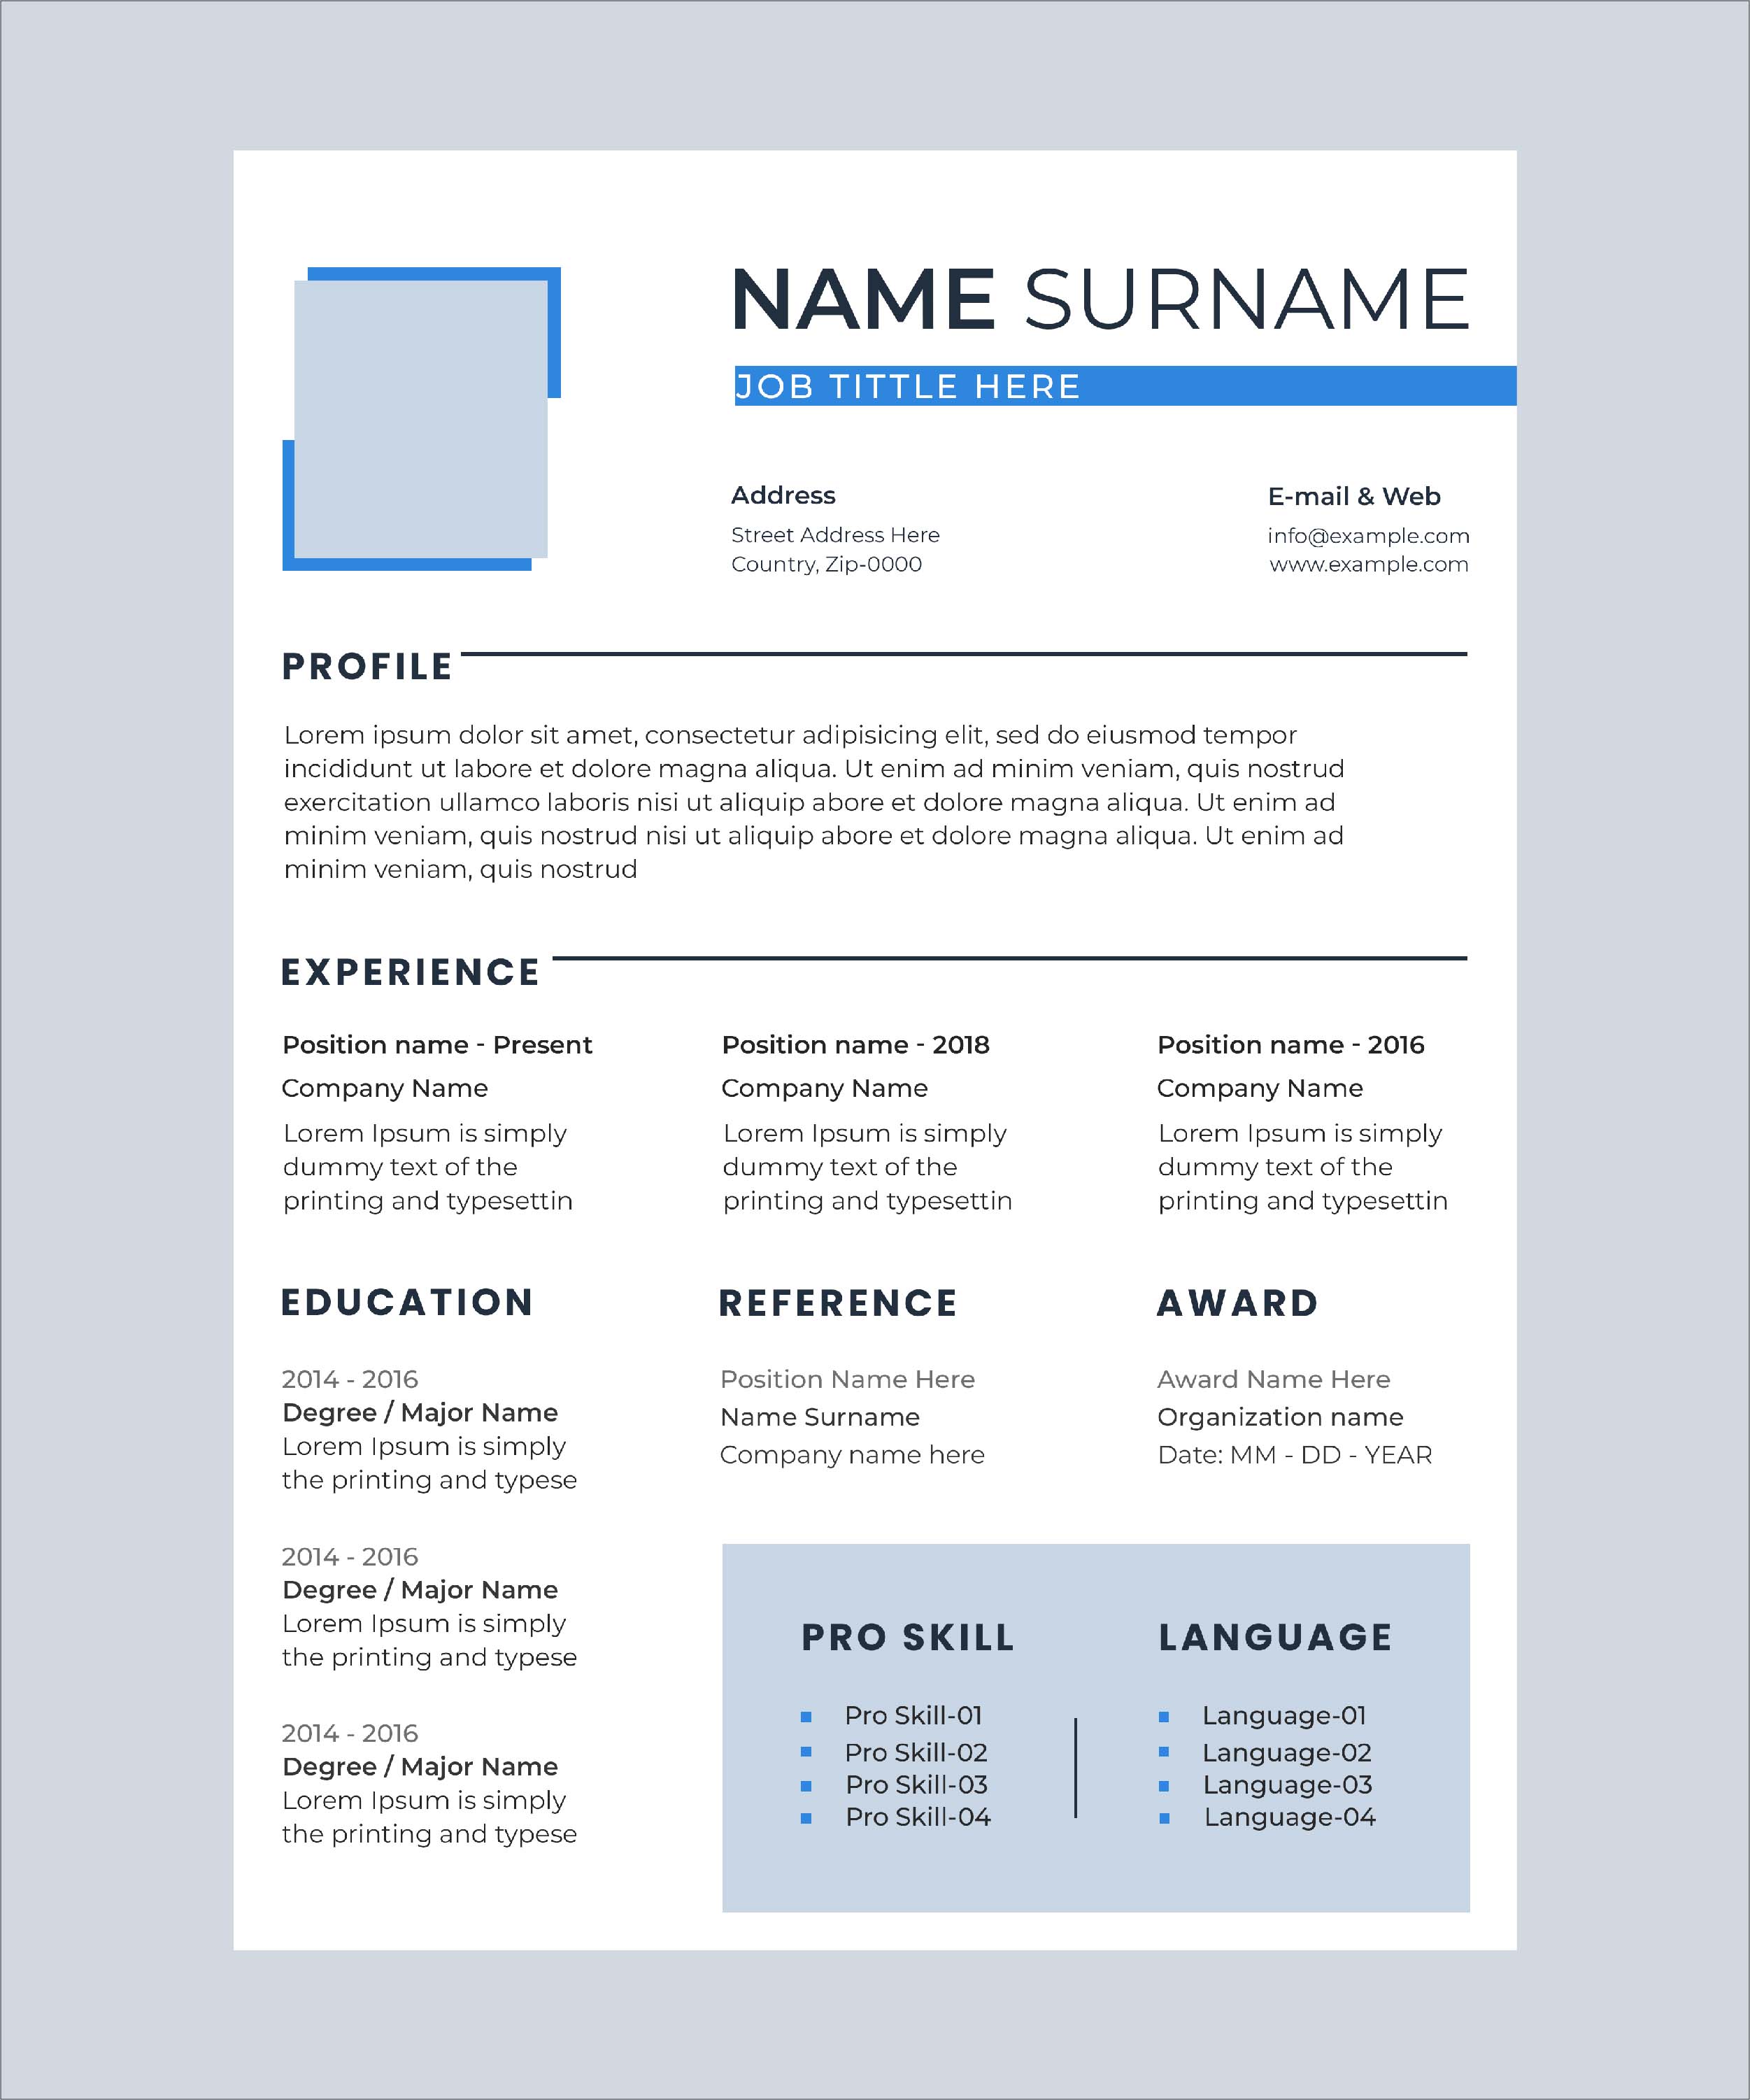 Professional resume template with blue accents.